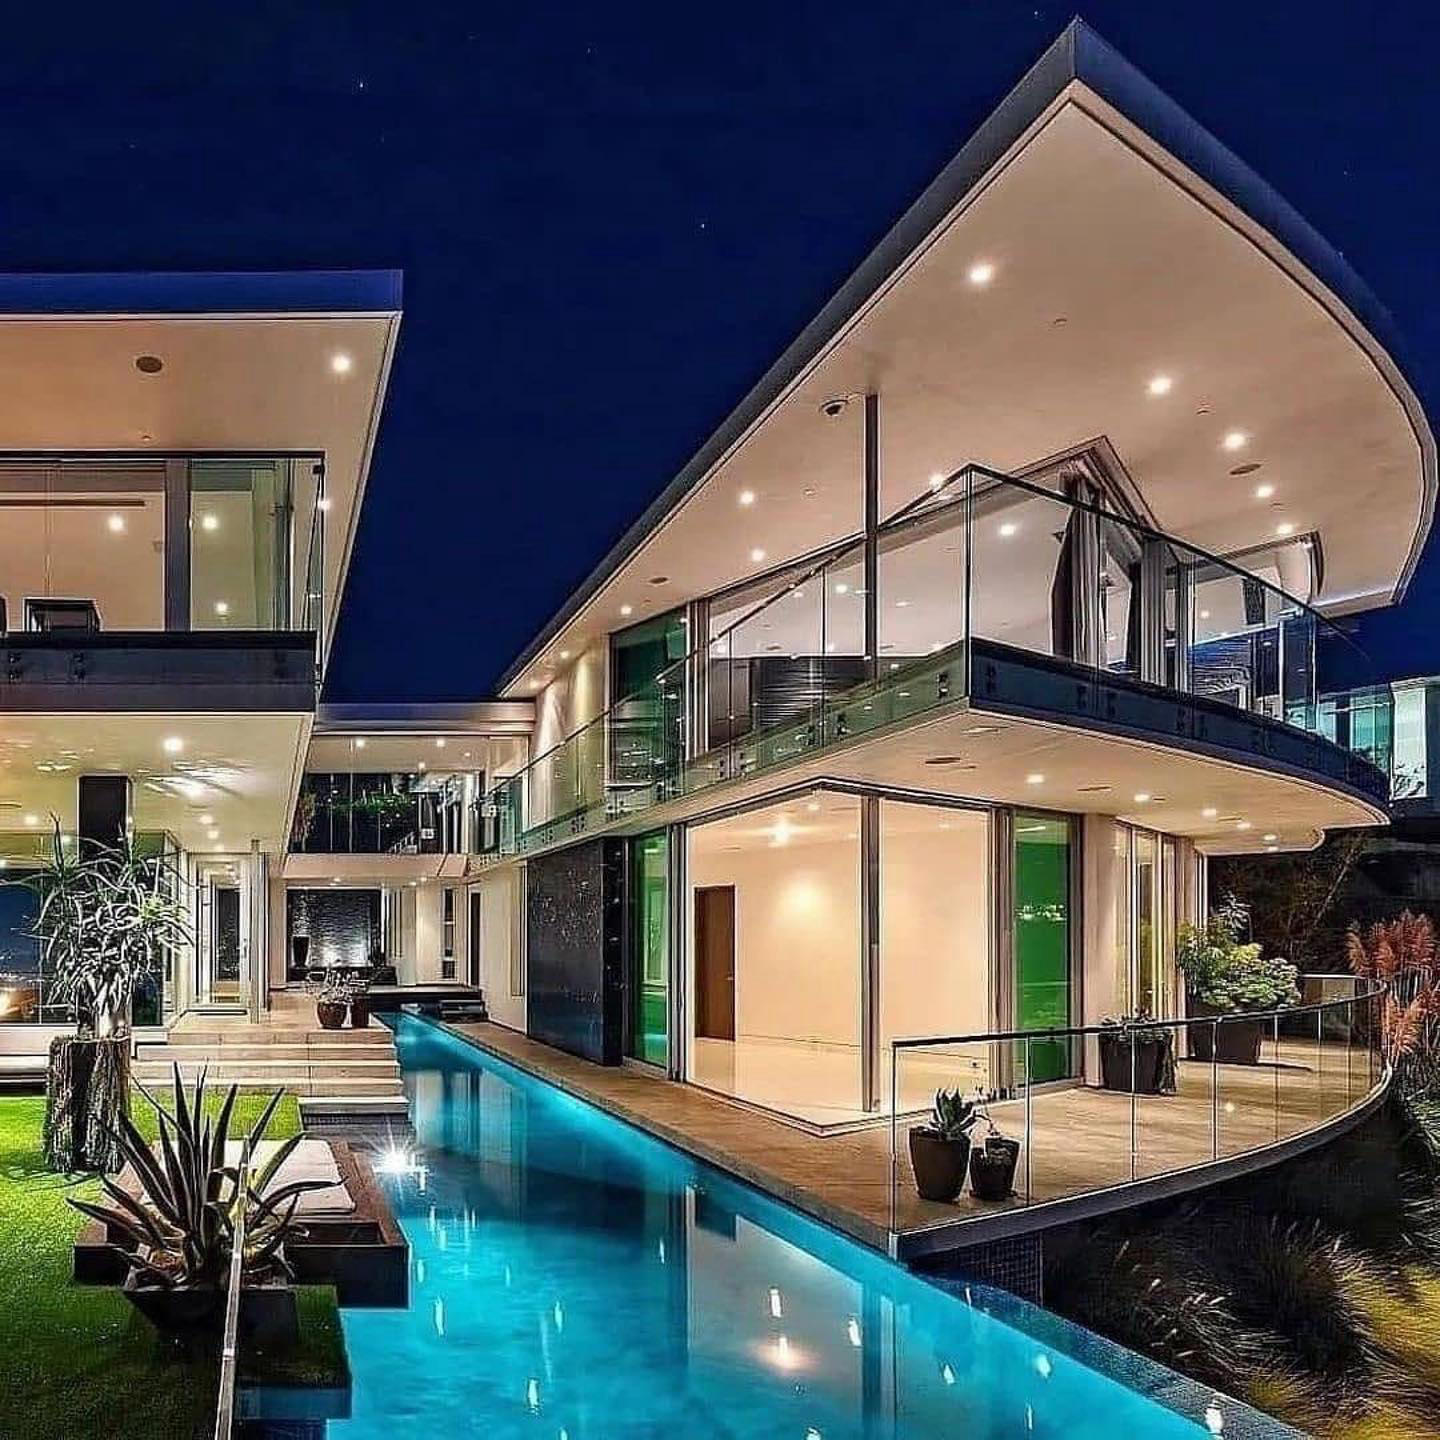 Luxurious Mordern Houses - ・・・Tag a friend and share your thoughts below